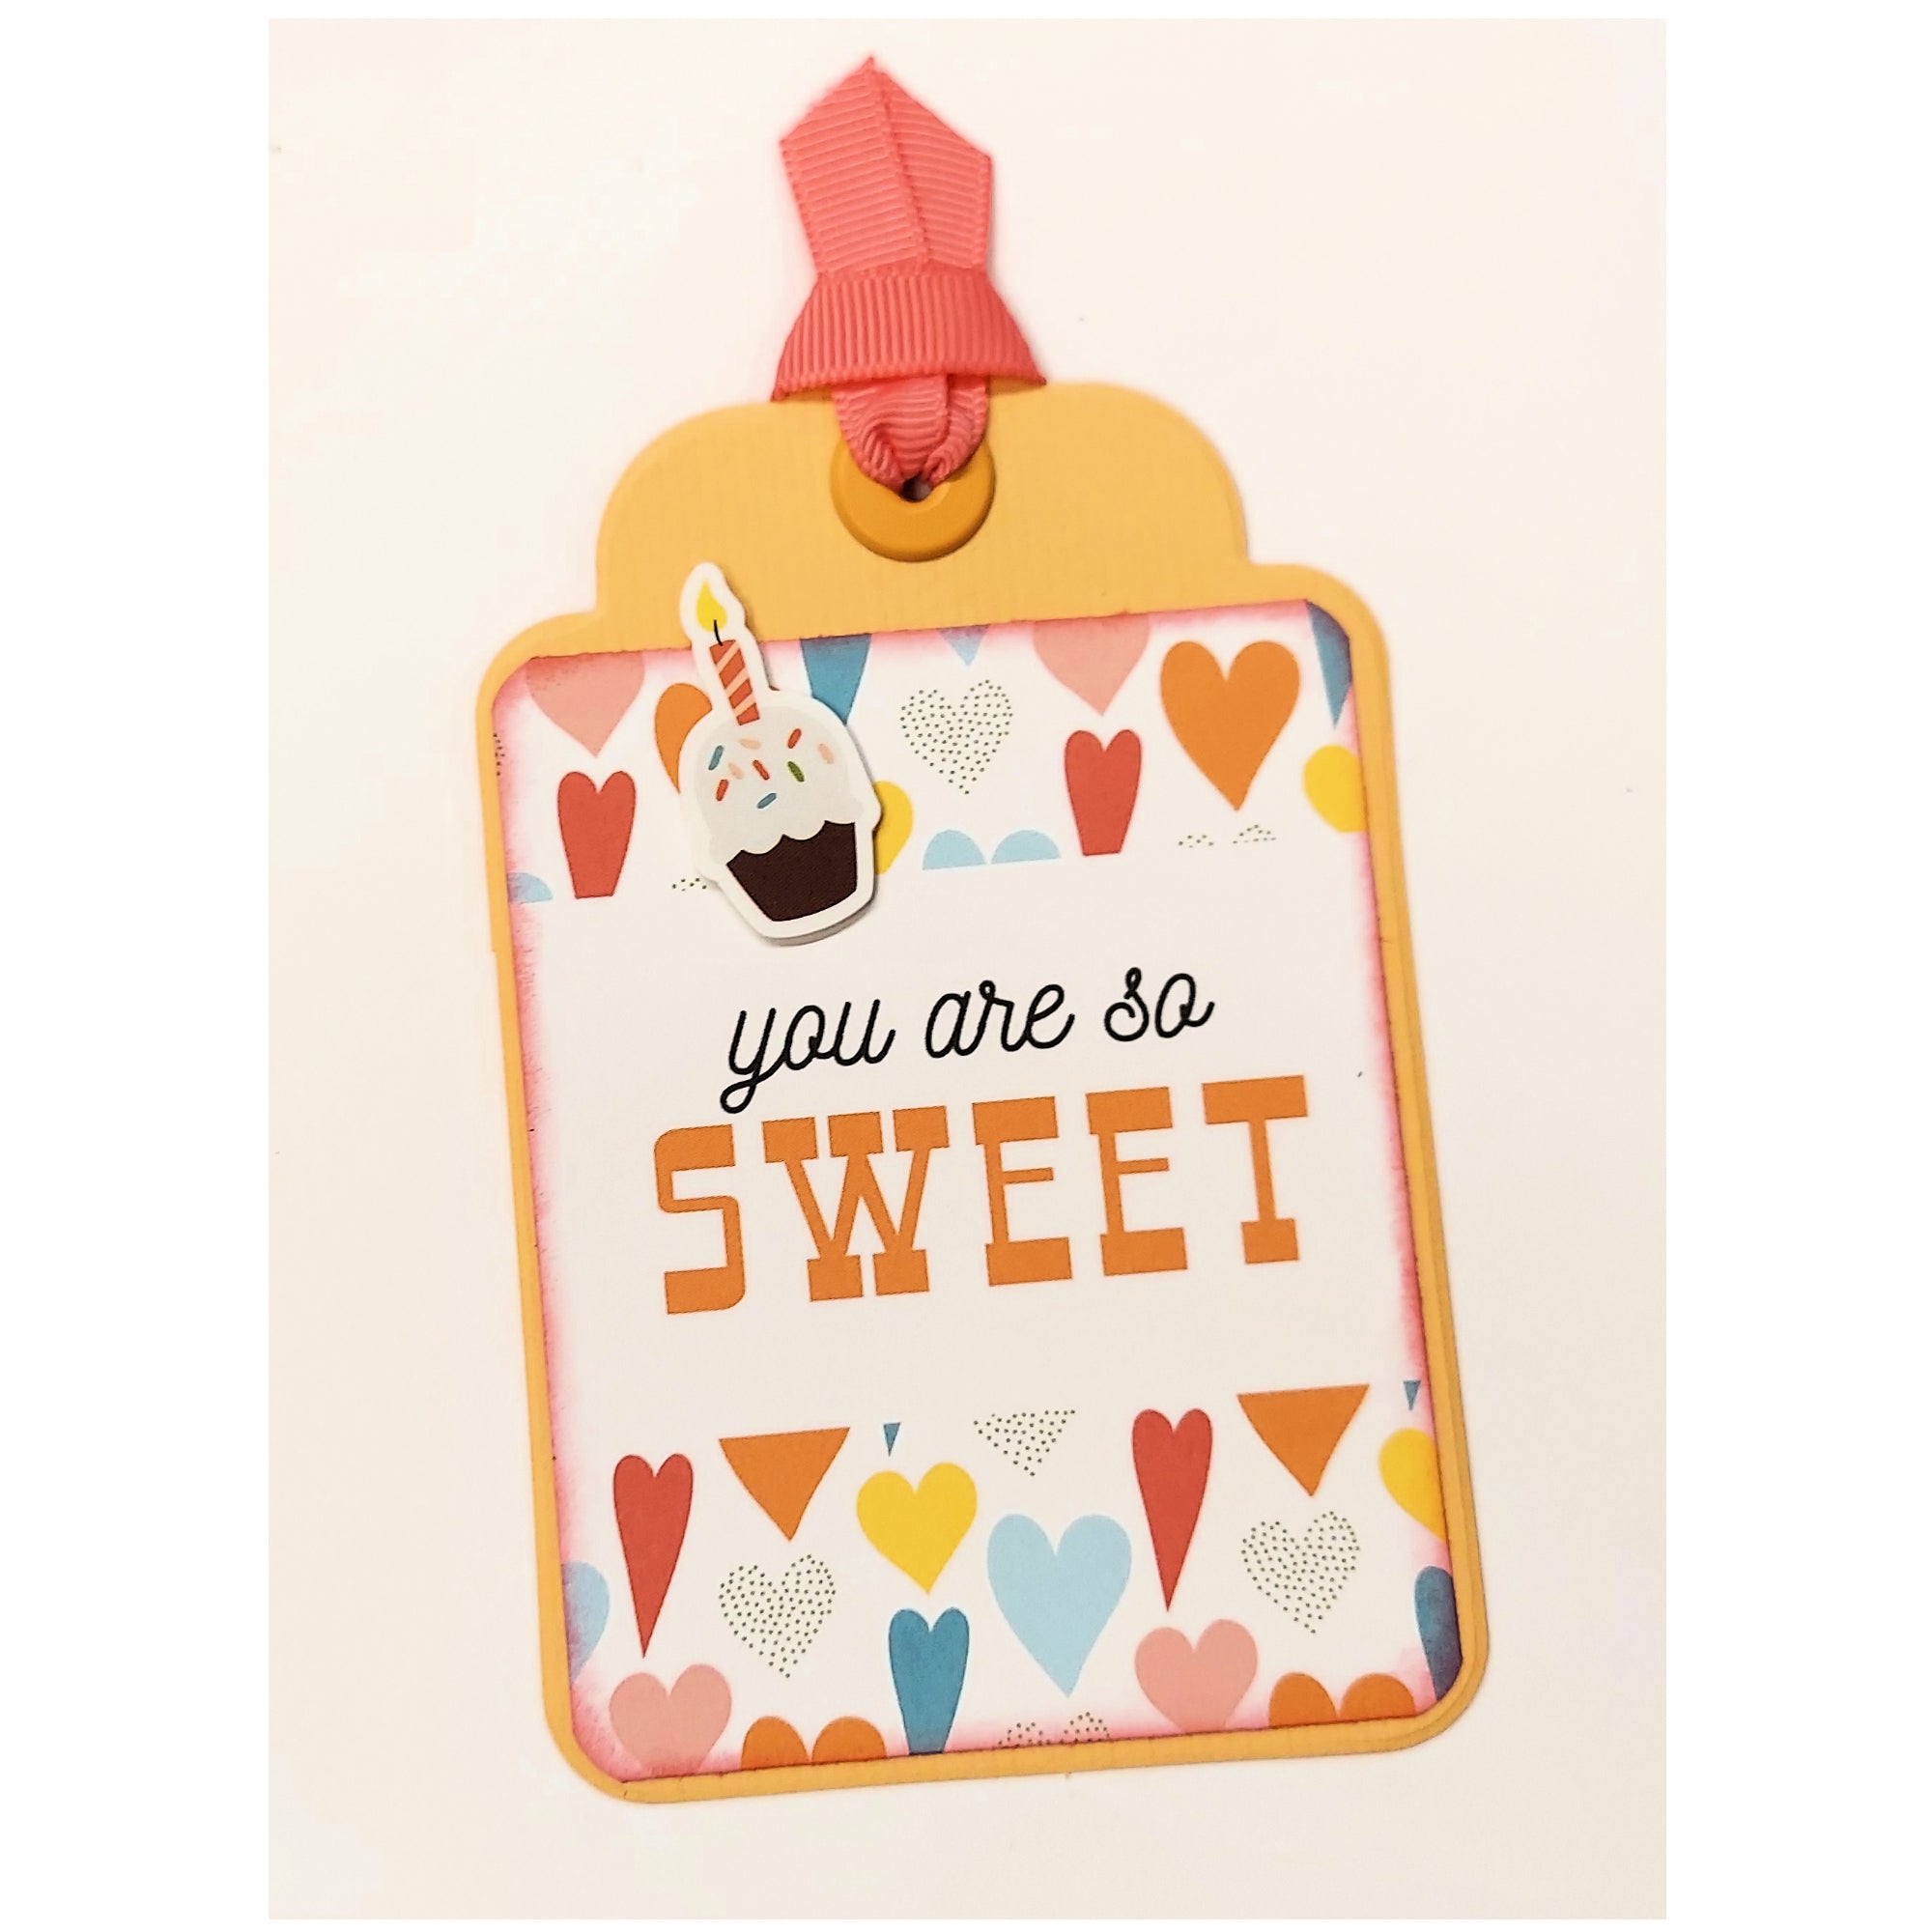 You Are So Sweet Tag 3 x 5 Coordinating Scrapbook Tag Embellishment by SSC Designs